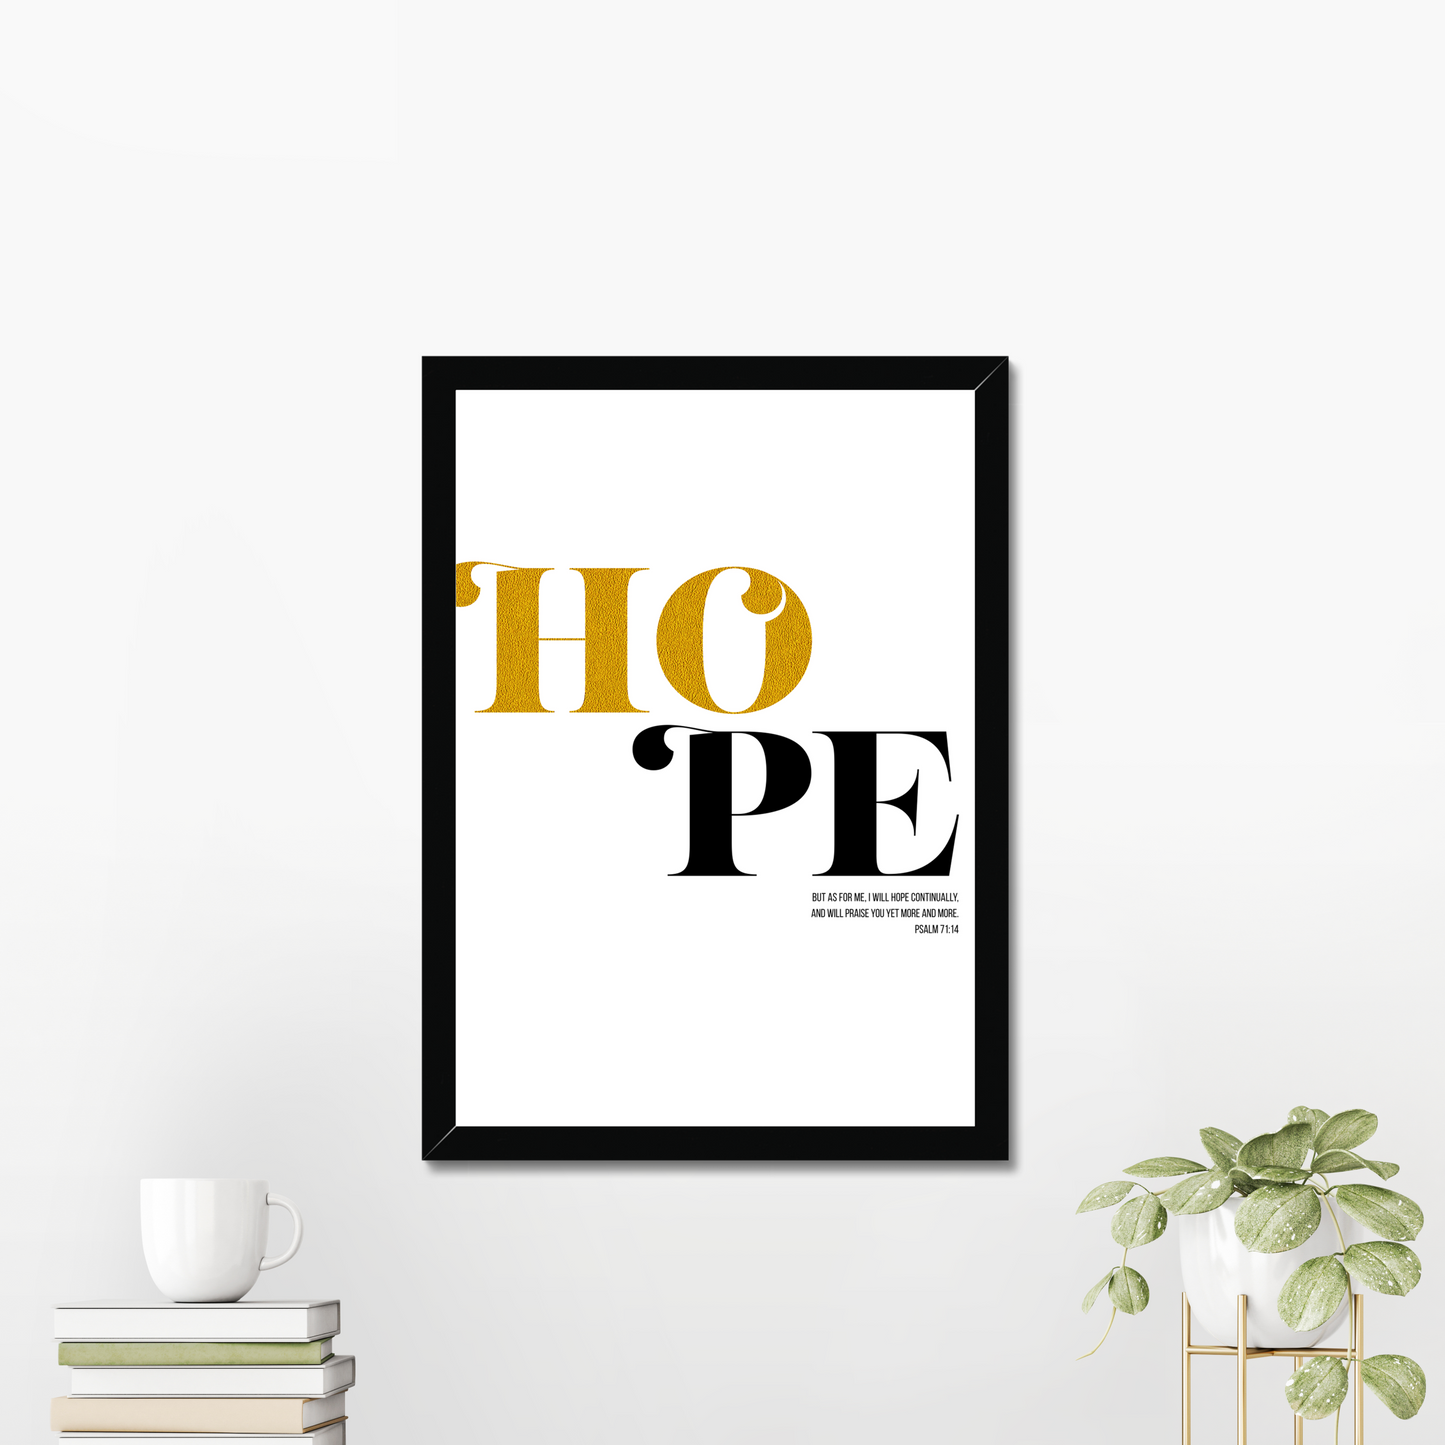 Hope - Psalm 71:14 Bible verse print - Faith Curated